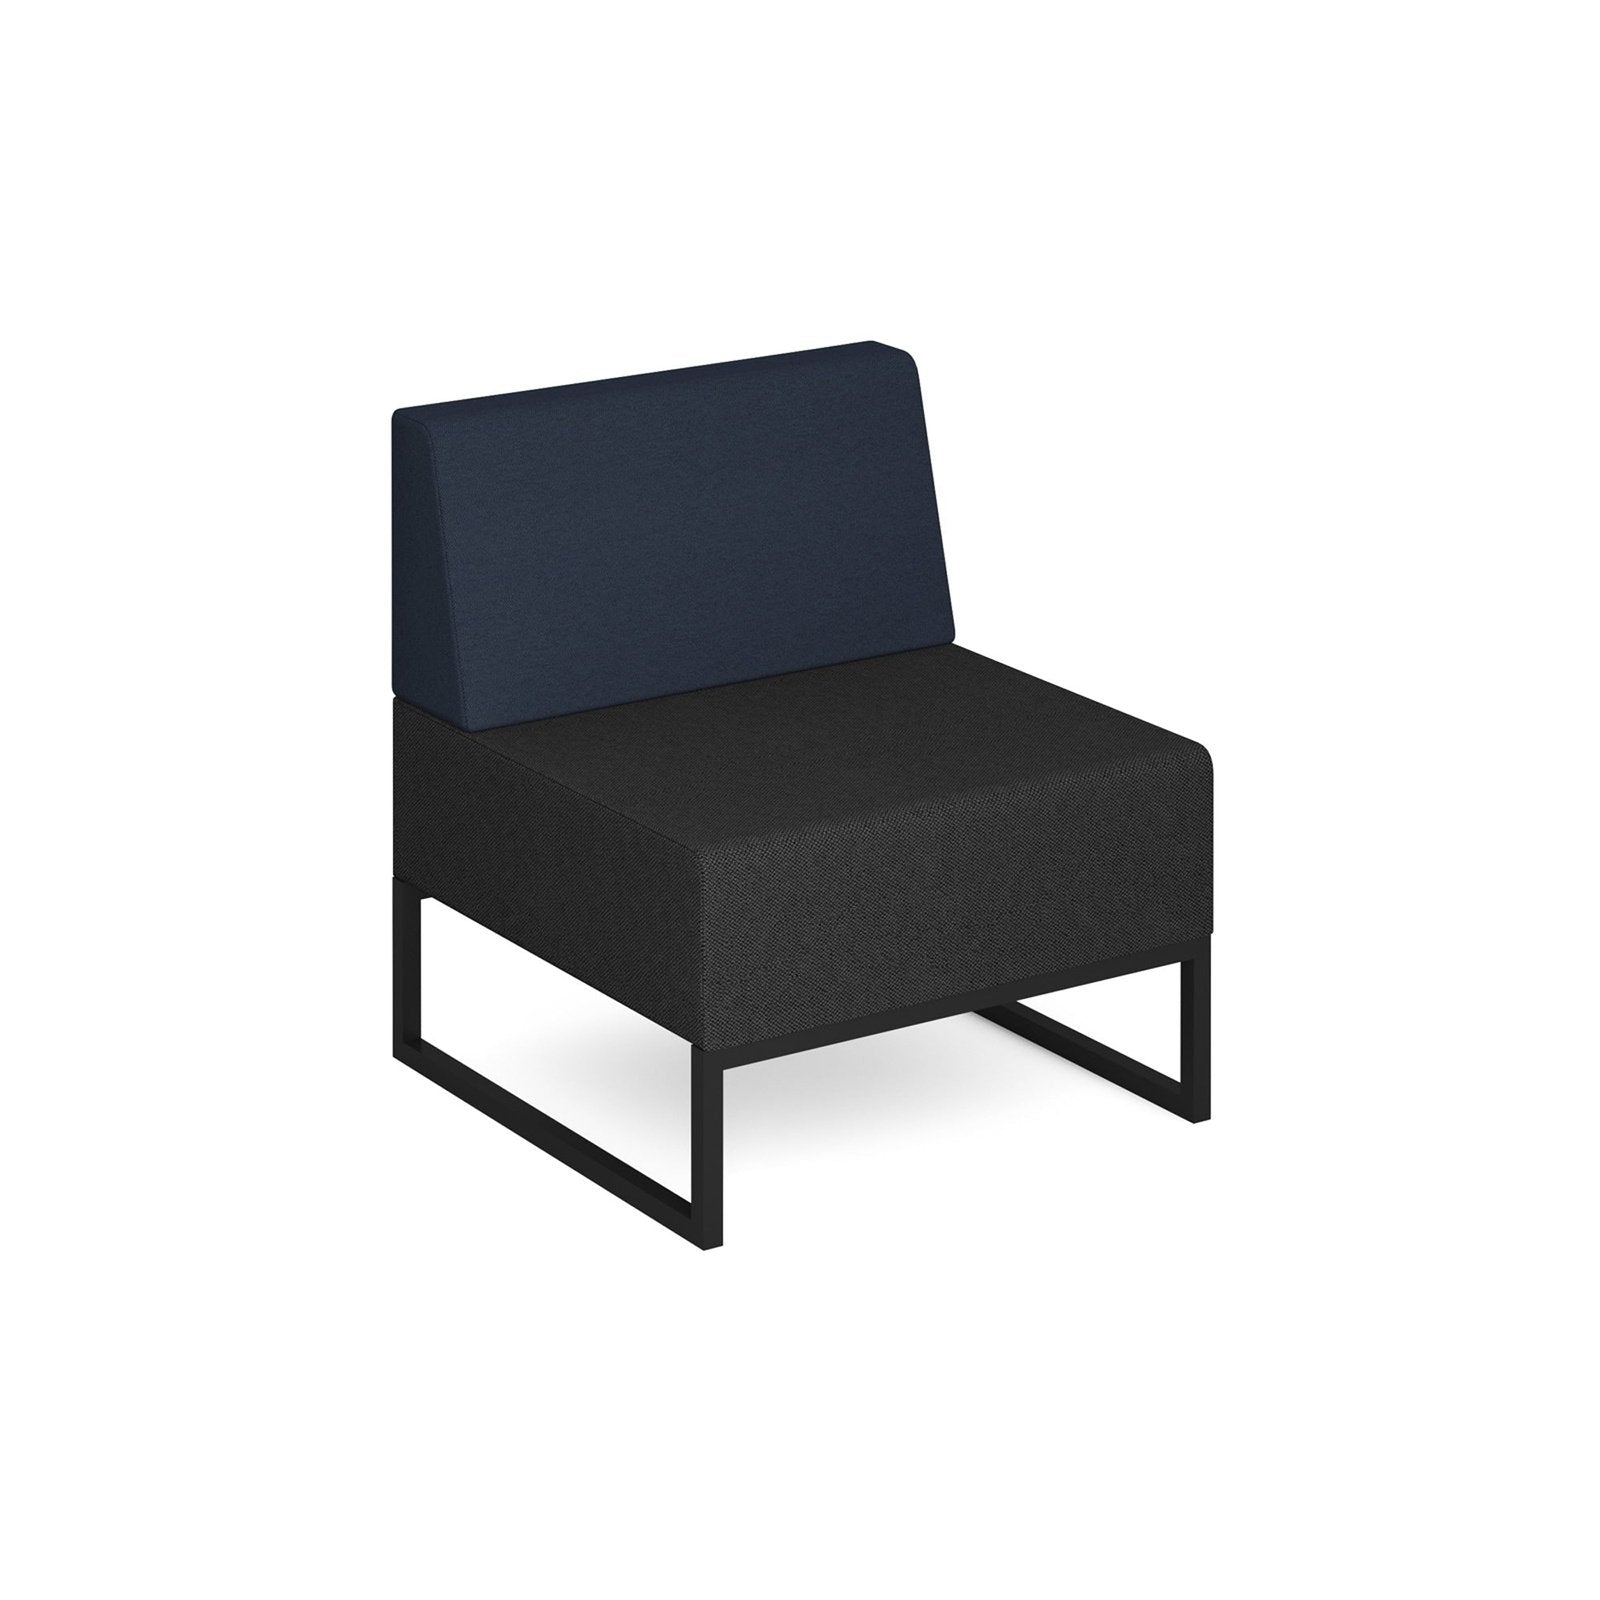 Nera modular soft seating single bench with back and black frame - Office Products Online